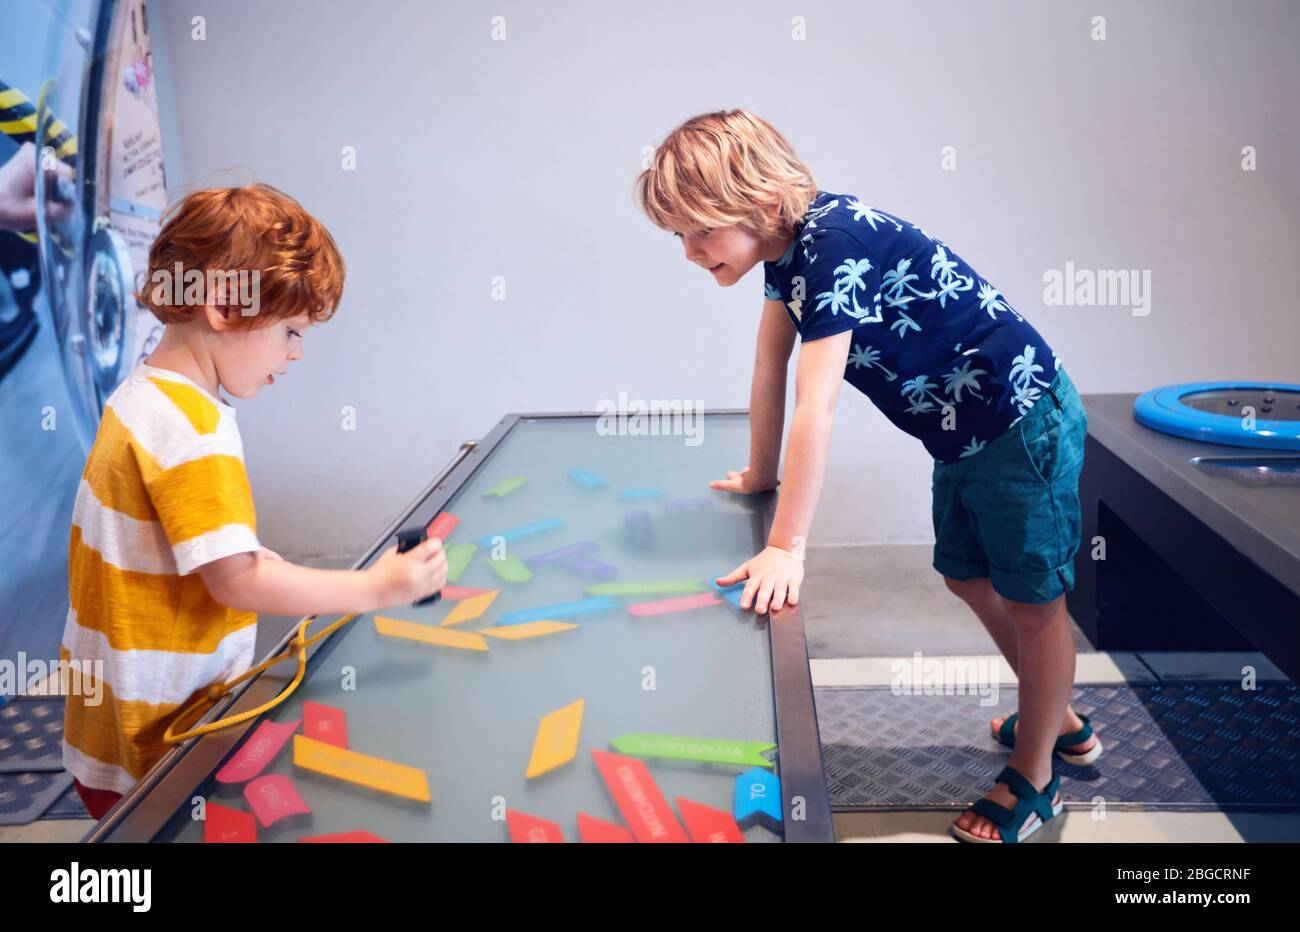 WARSAW, POLAND - June 20, 2019: Kids playing with magnetic words in the Copernicus Science Centre in Warsaw, Poland Stock Photo